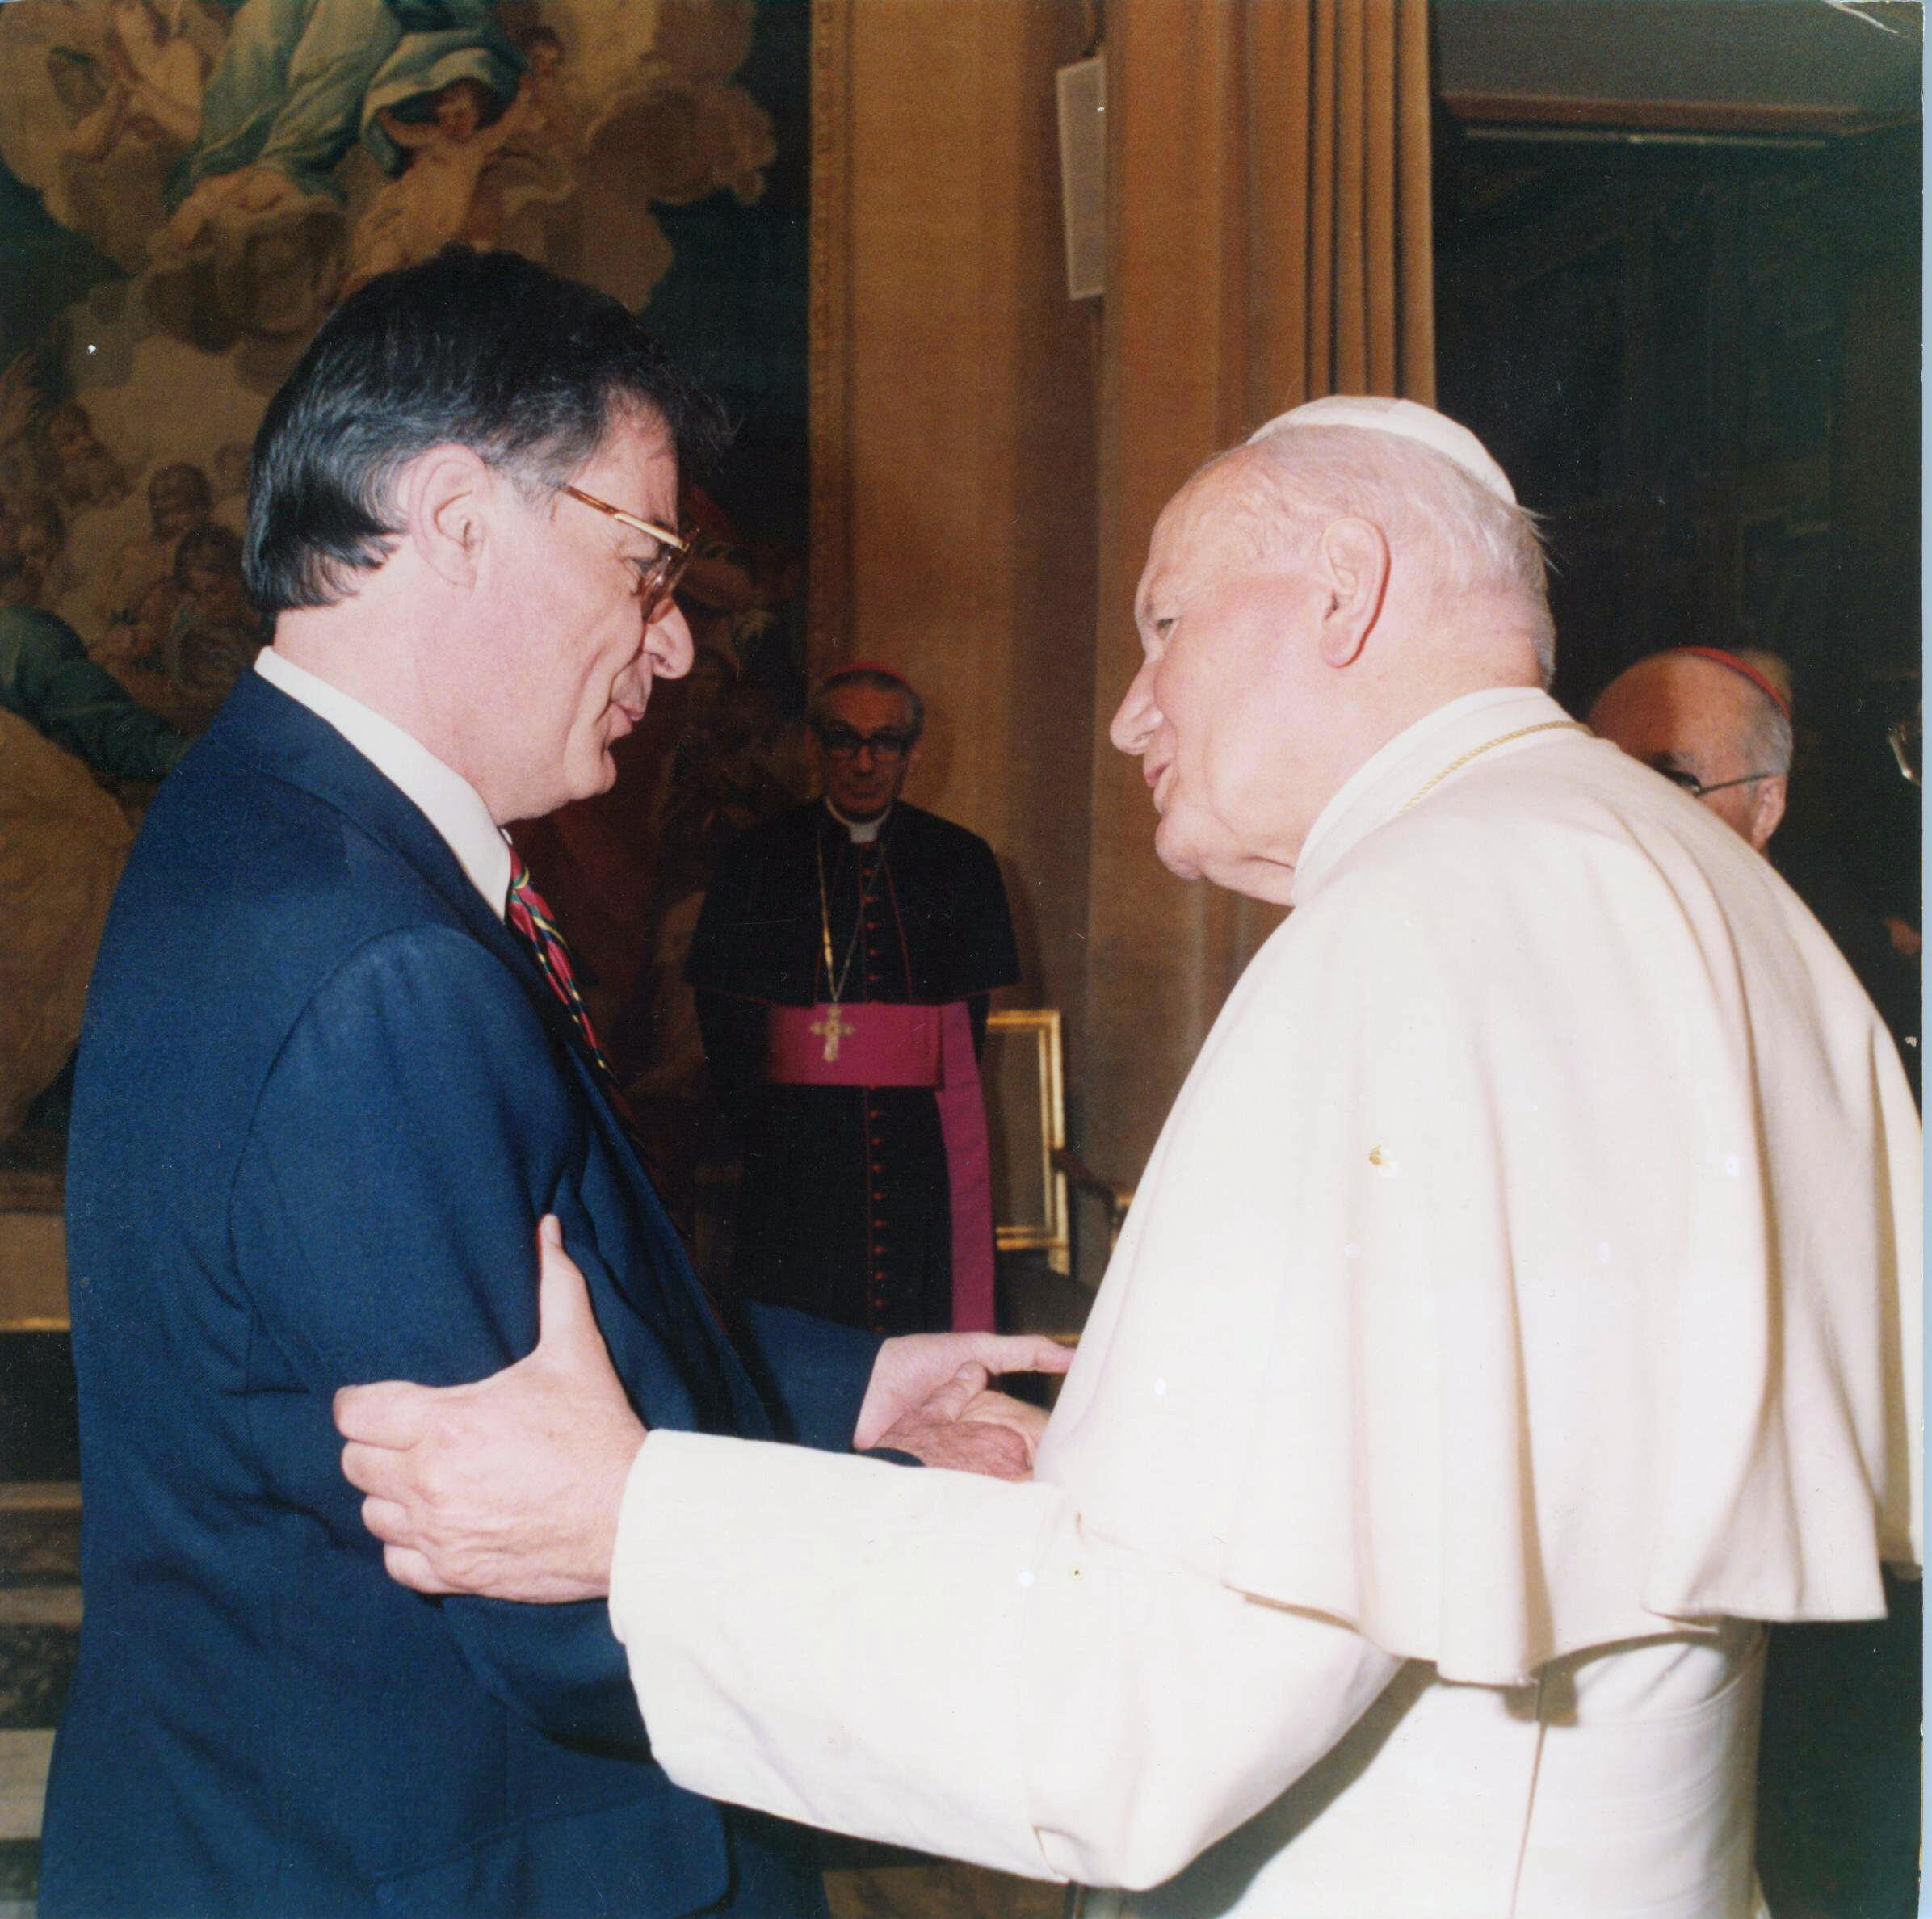 May 1993 - Richard Sipe and Pope John Paul II - Click on image for a larger view